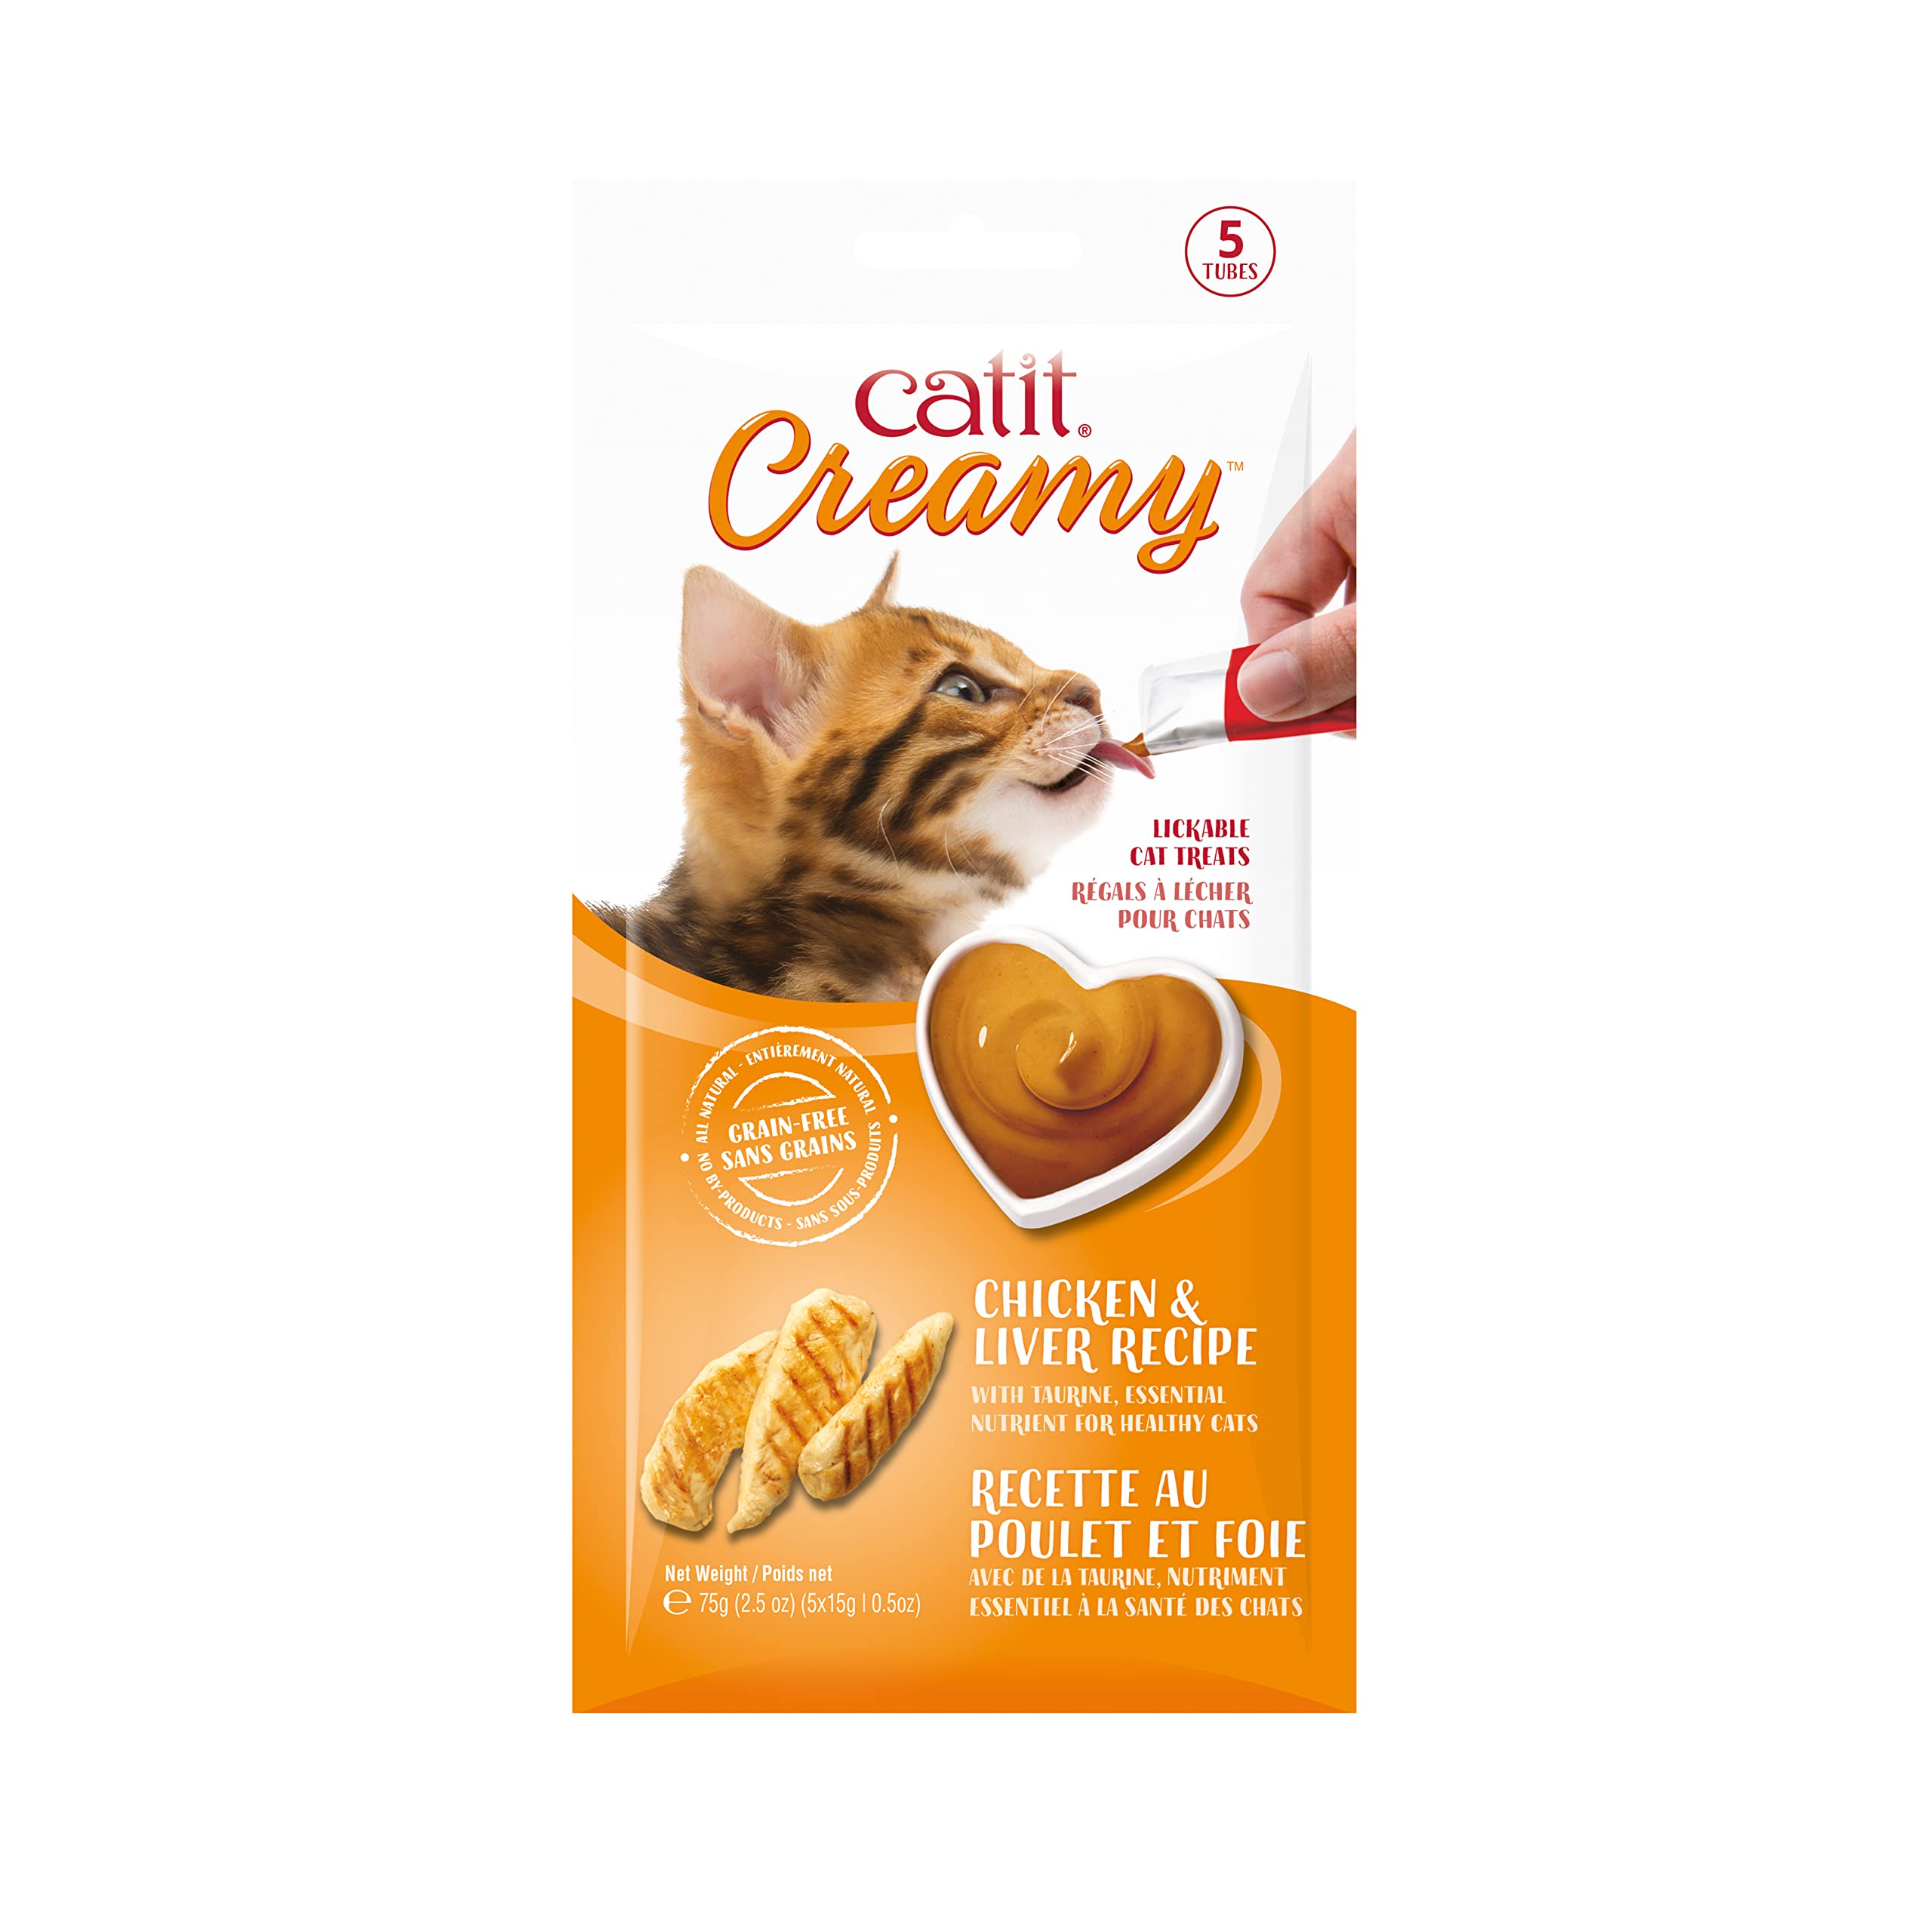 5-Pack 0.5oz Catit Creamy Lickable Cat Treats (Chicken & Liver) $1.59 w/ Subscribe & Save